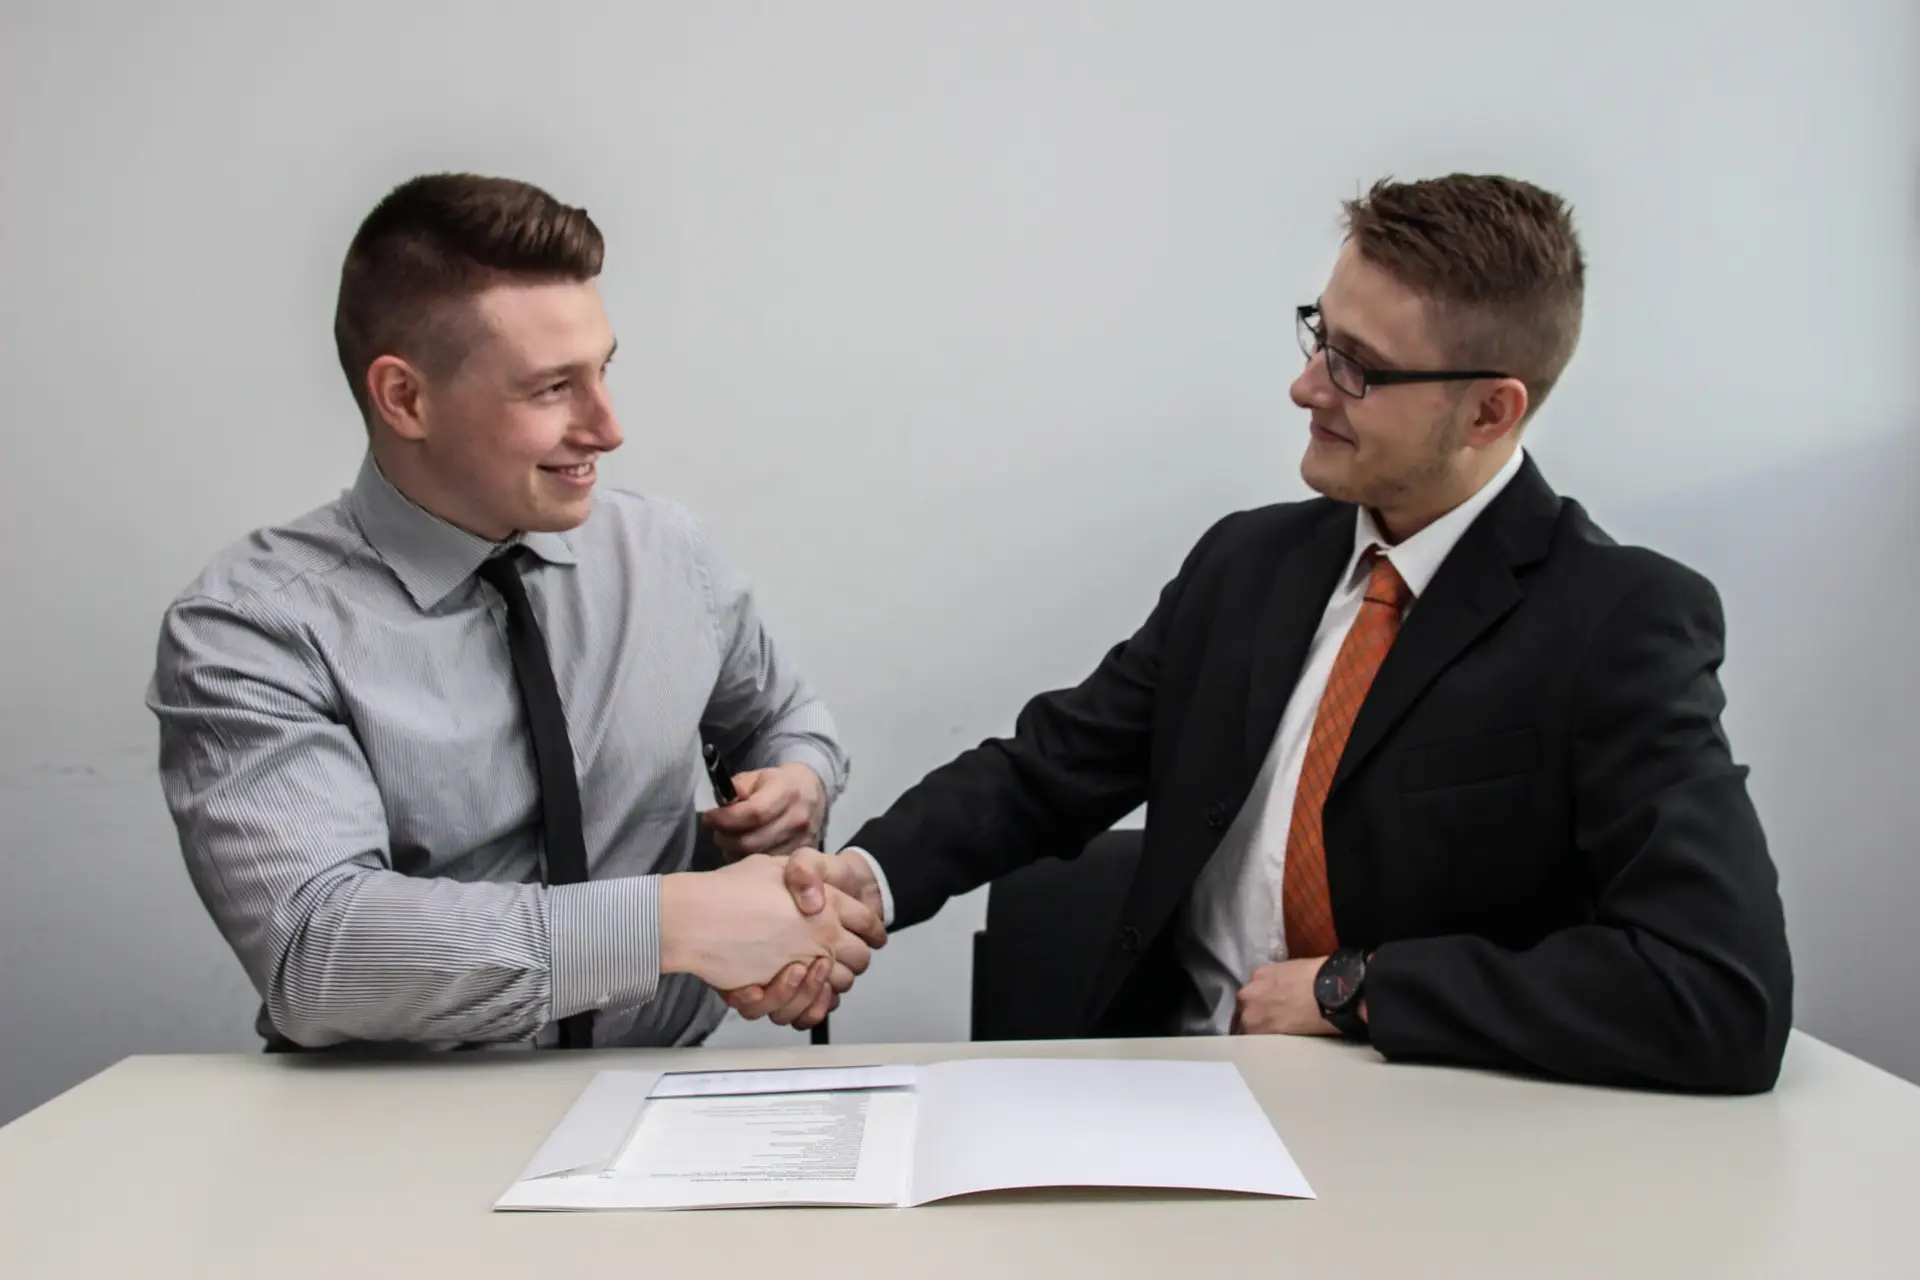 Two businessmen in business attire shaking hands over documents on a table.